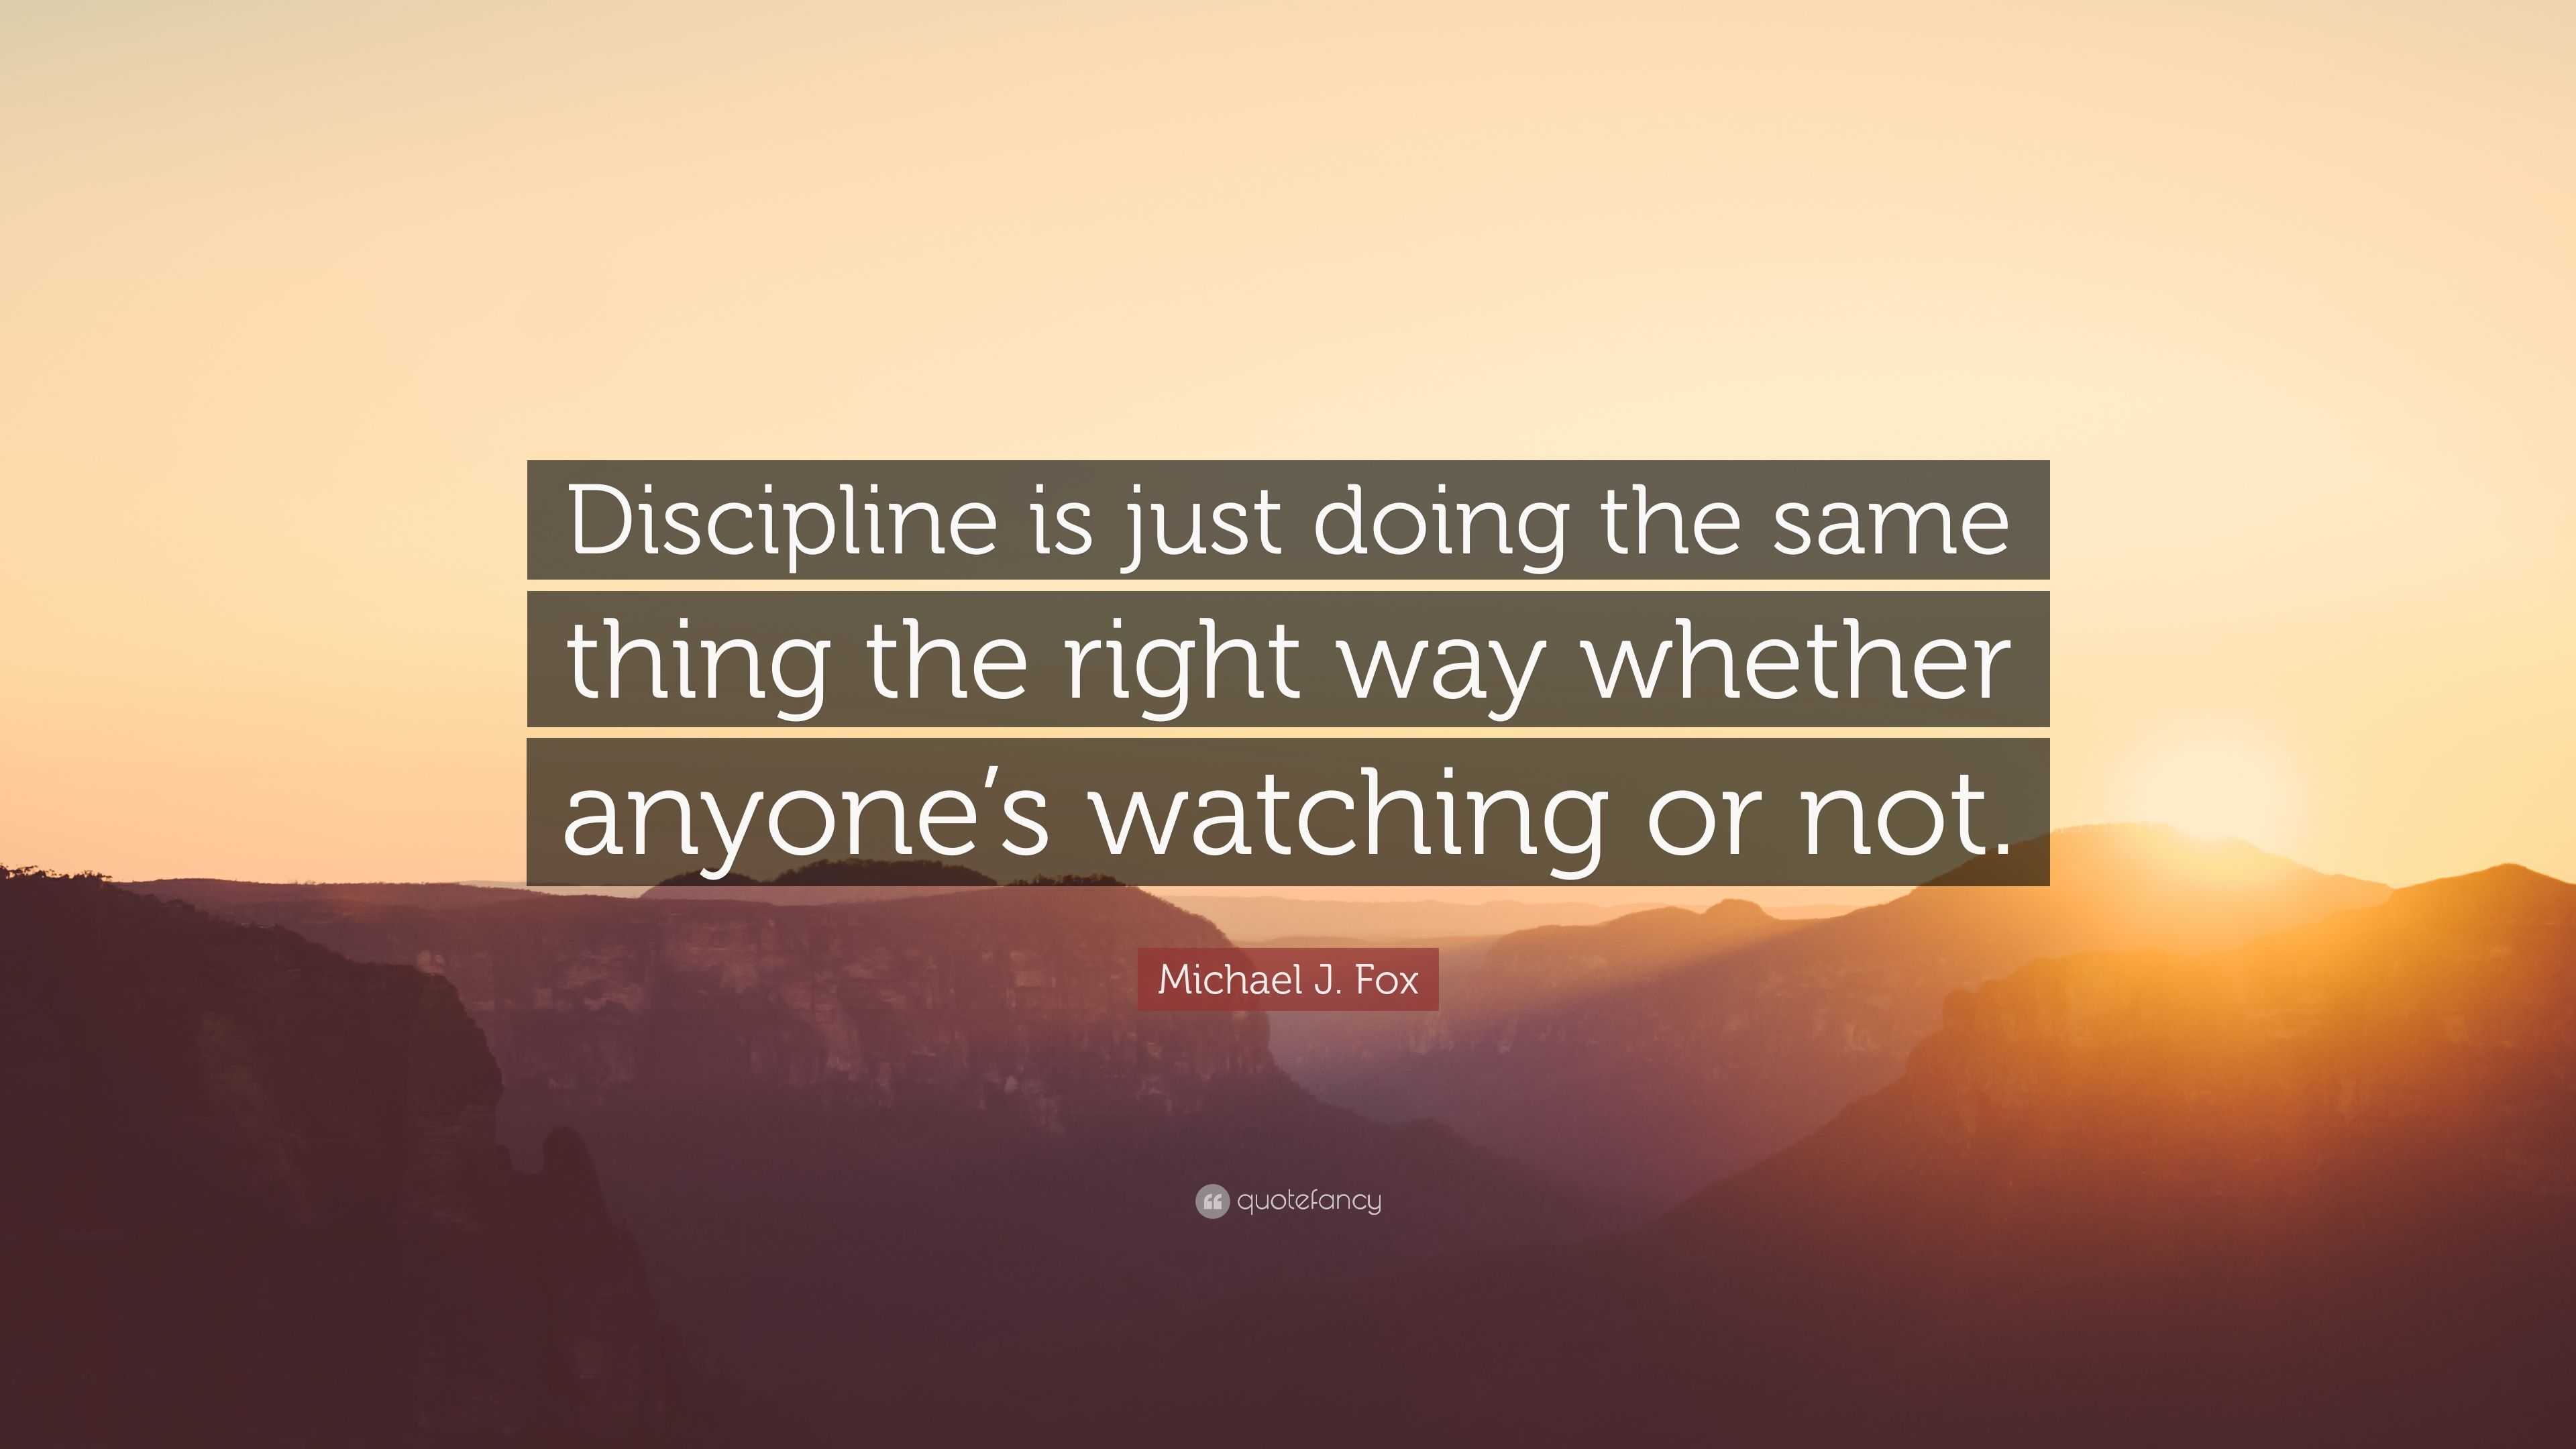 Michael J. Fox Quote “Discipline is just doing the same